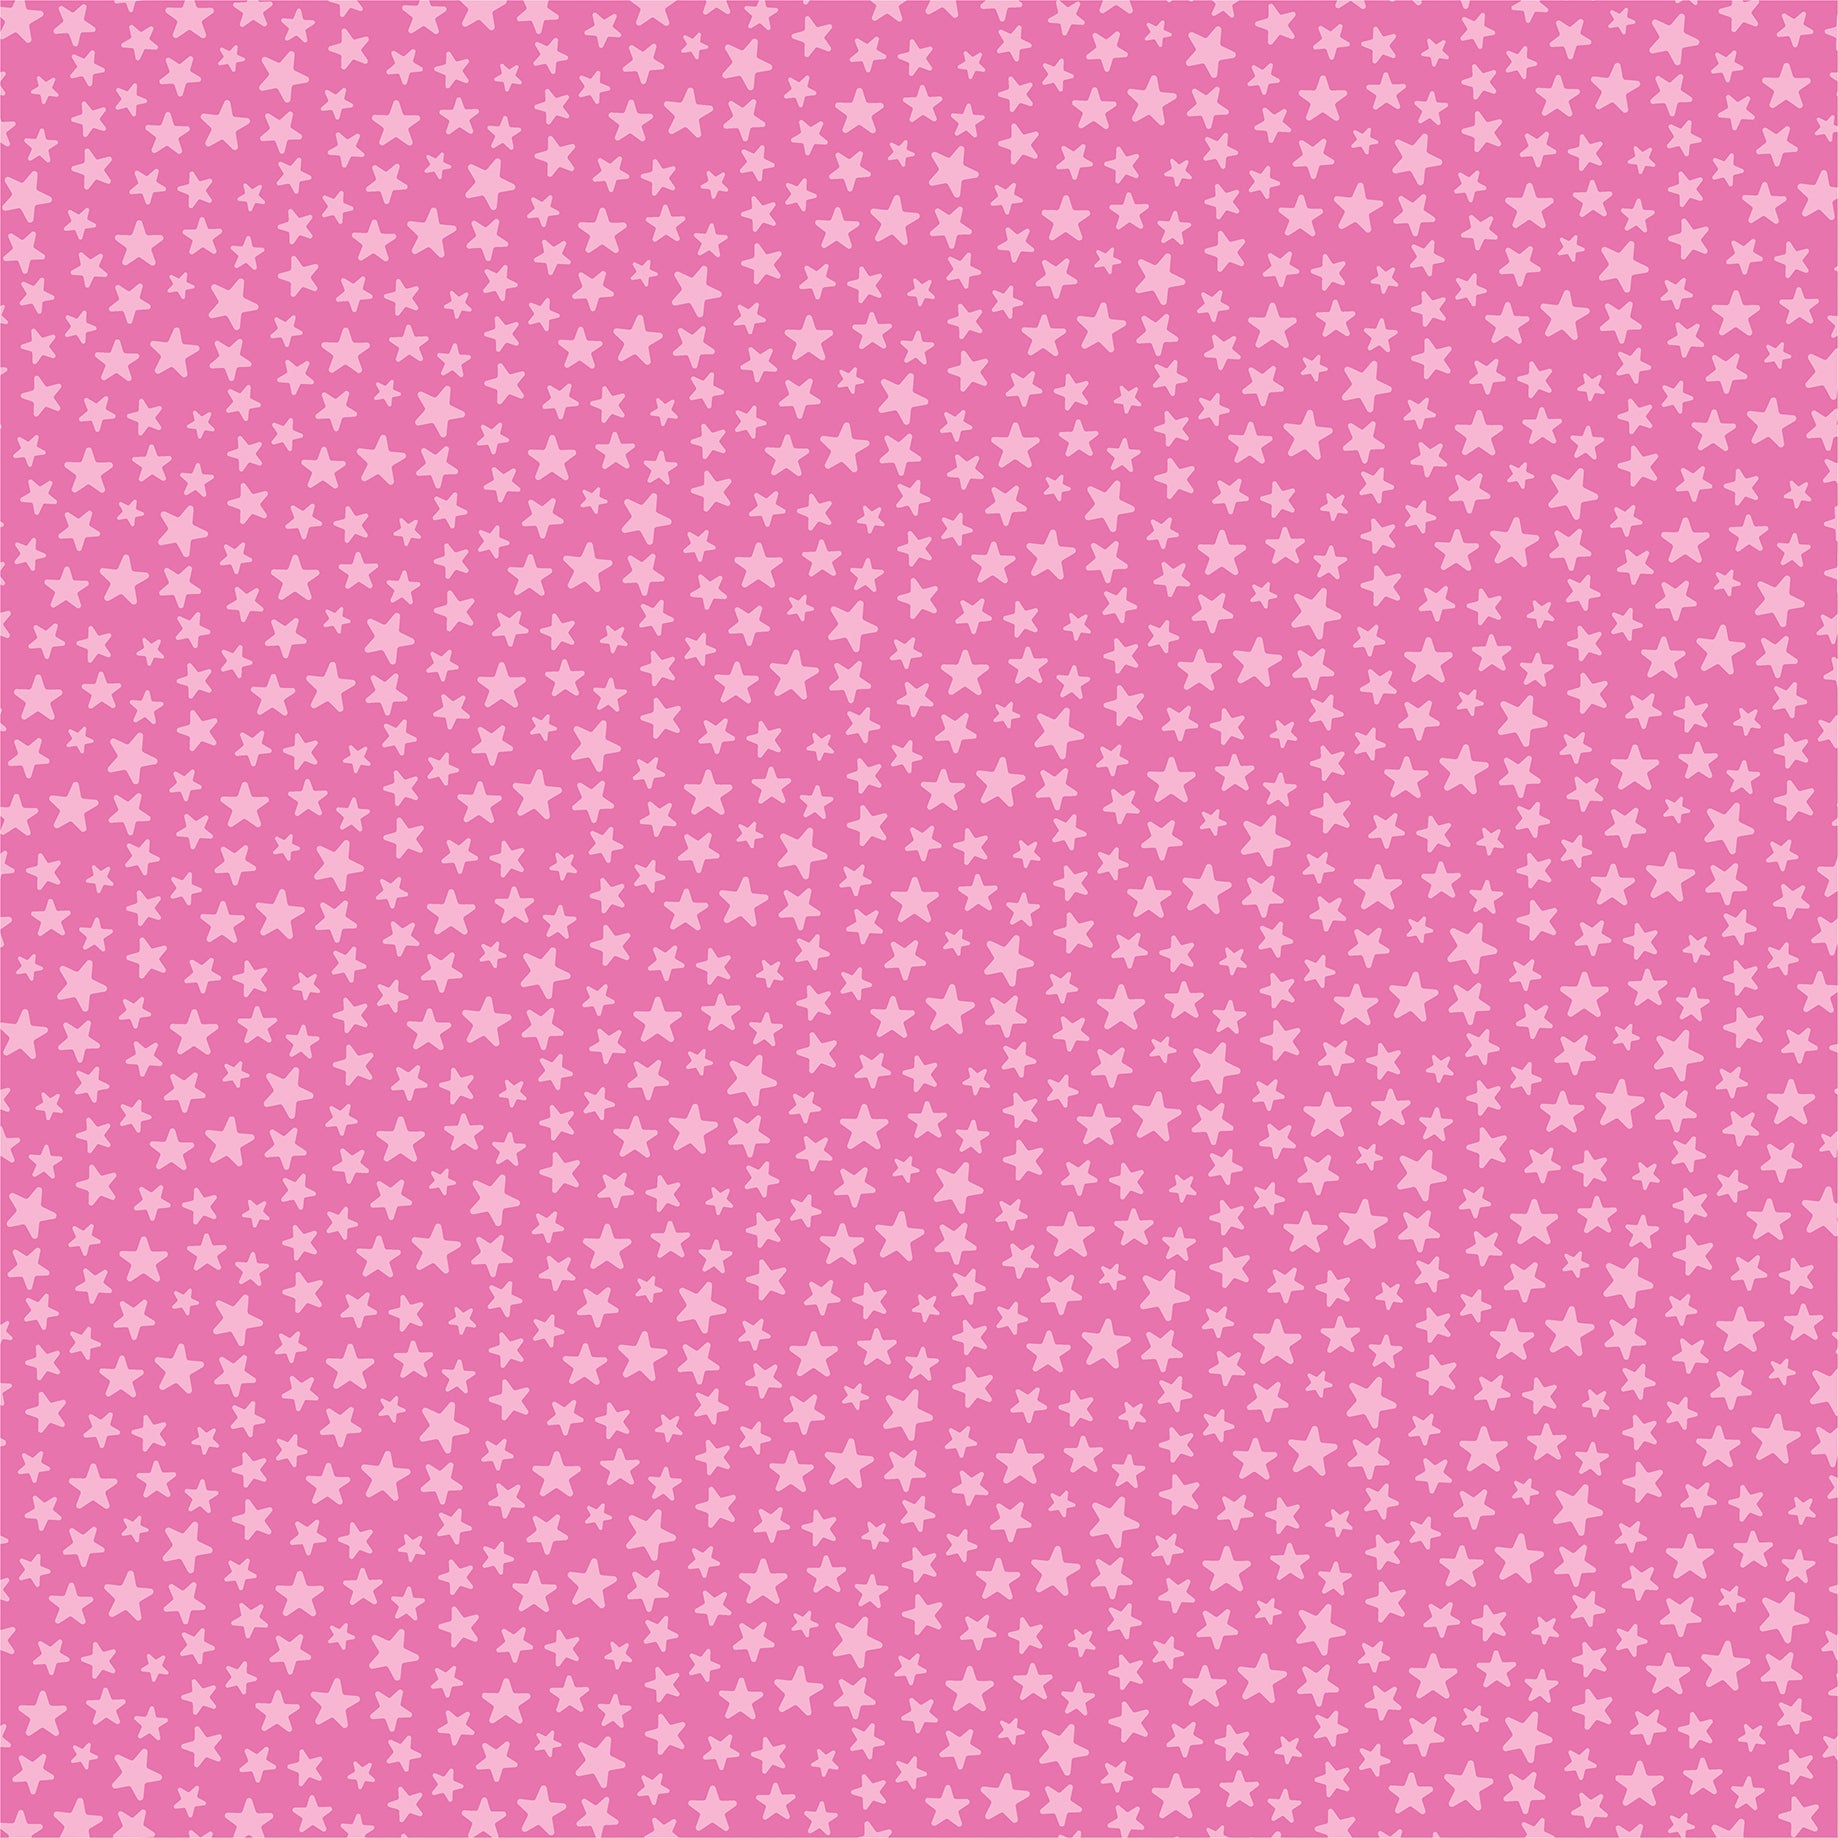 Make a Wish Birthday Girl Collection Birthday Girl Balloons 12 x 12 Double-Sided Scrapbook Paper by Echo Park Paper